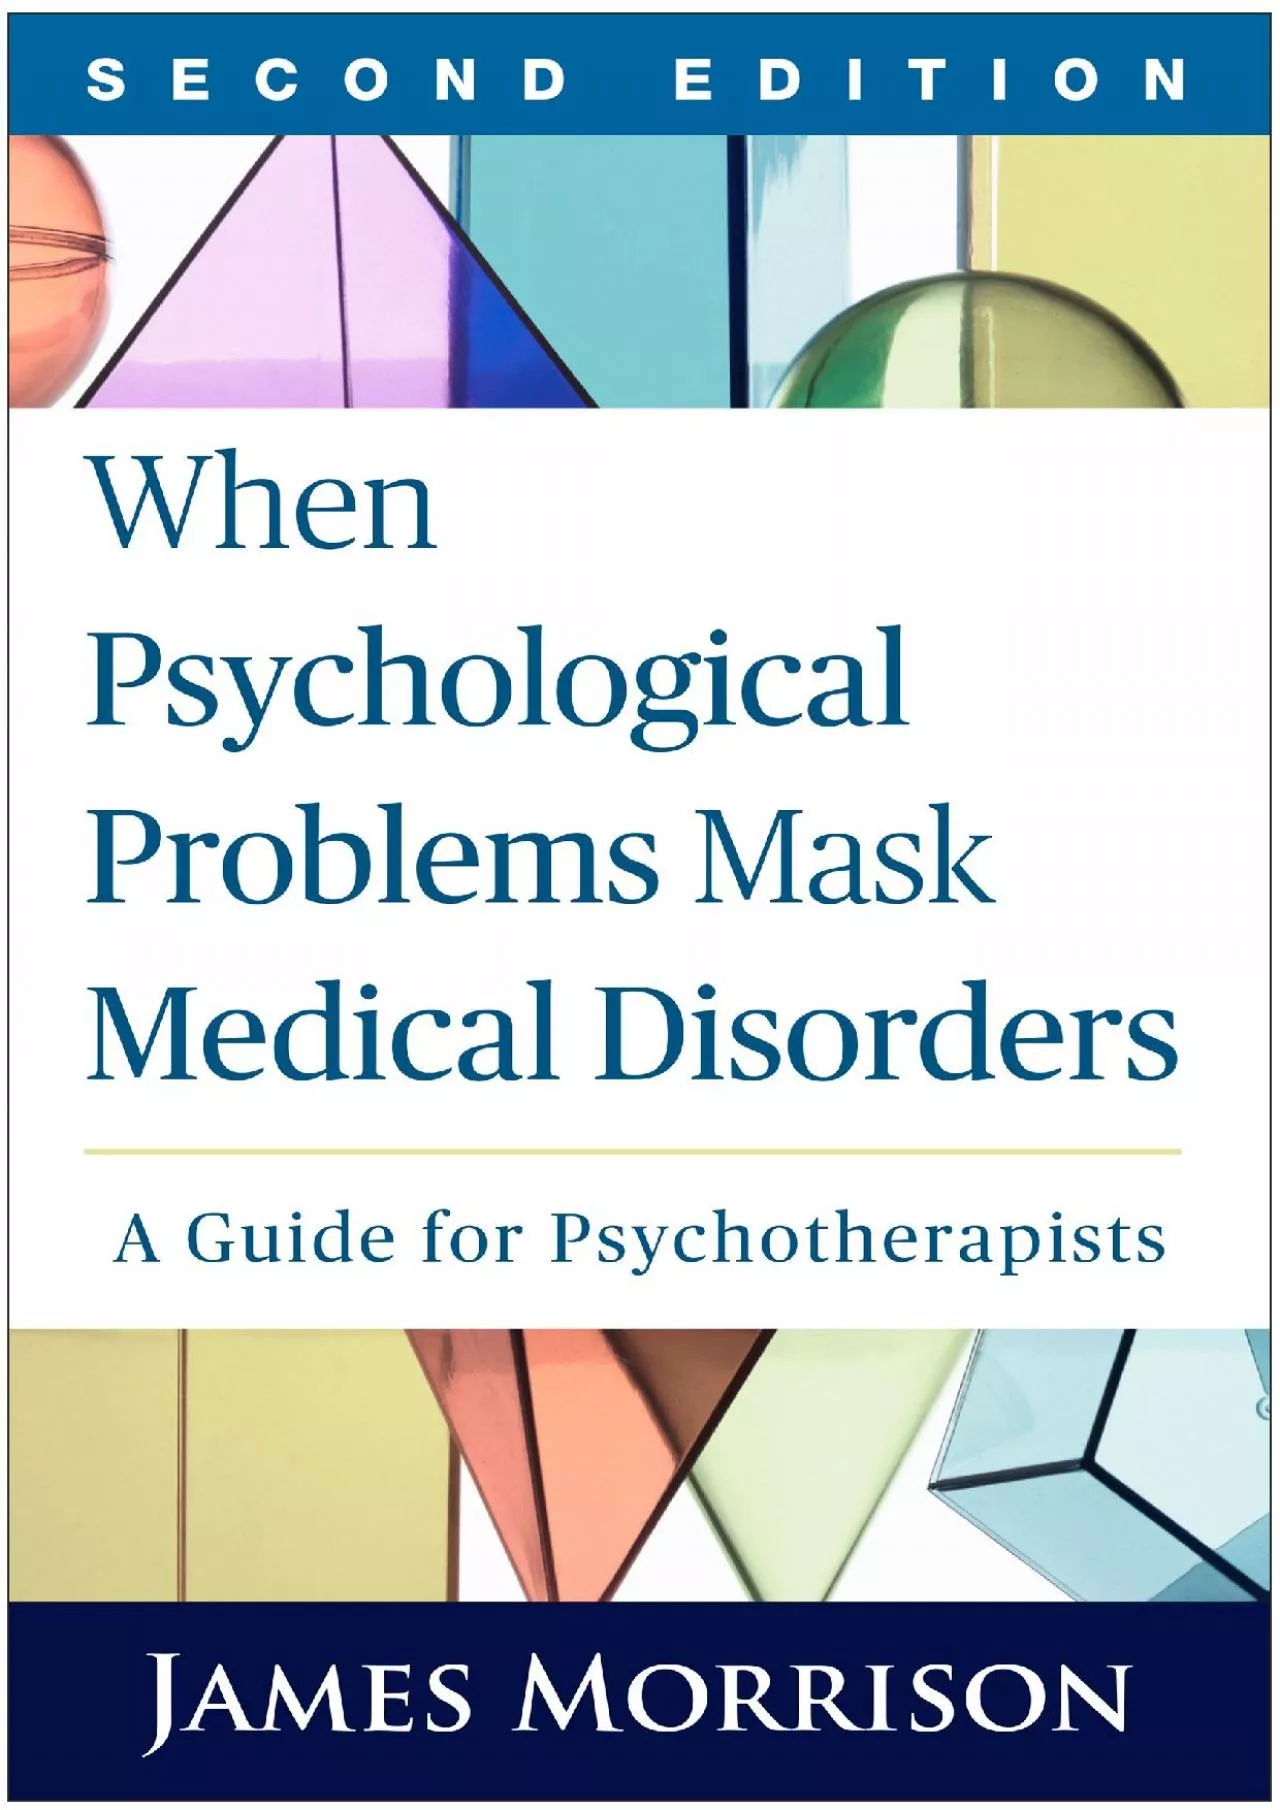 (BOOK)-When Psychological Problems Mask Medical Disorders, Second Edition: A Guide for